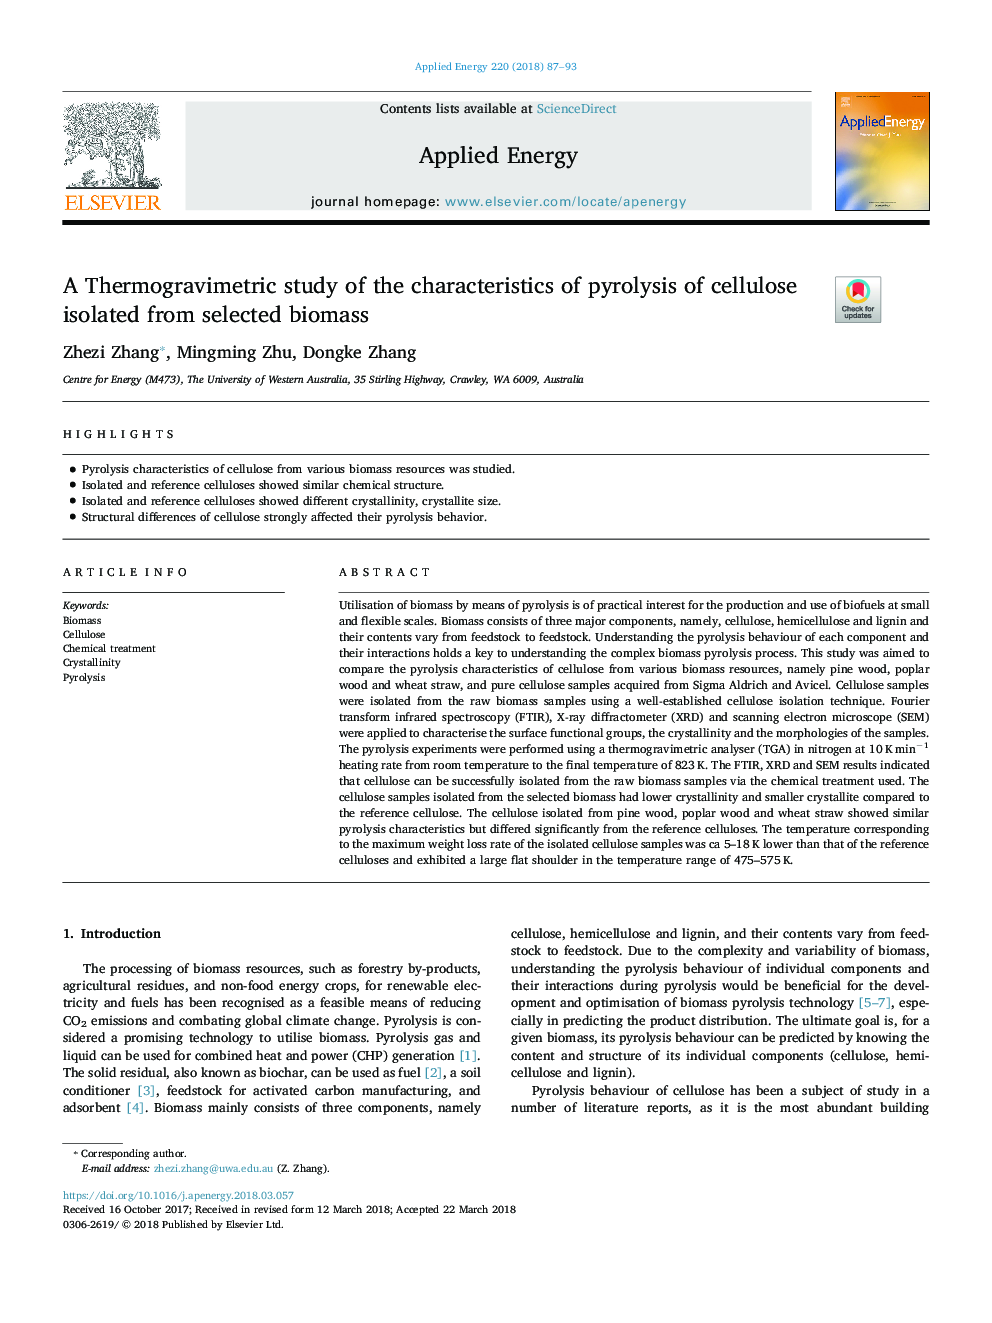 A Thermogravimetric study of the characteristics of pyrolysis of cellulose isolated from selected biomass